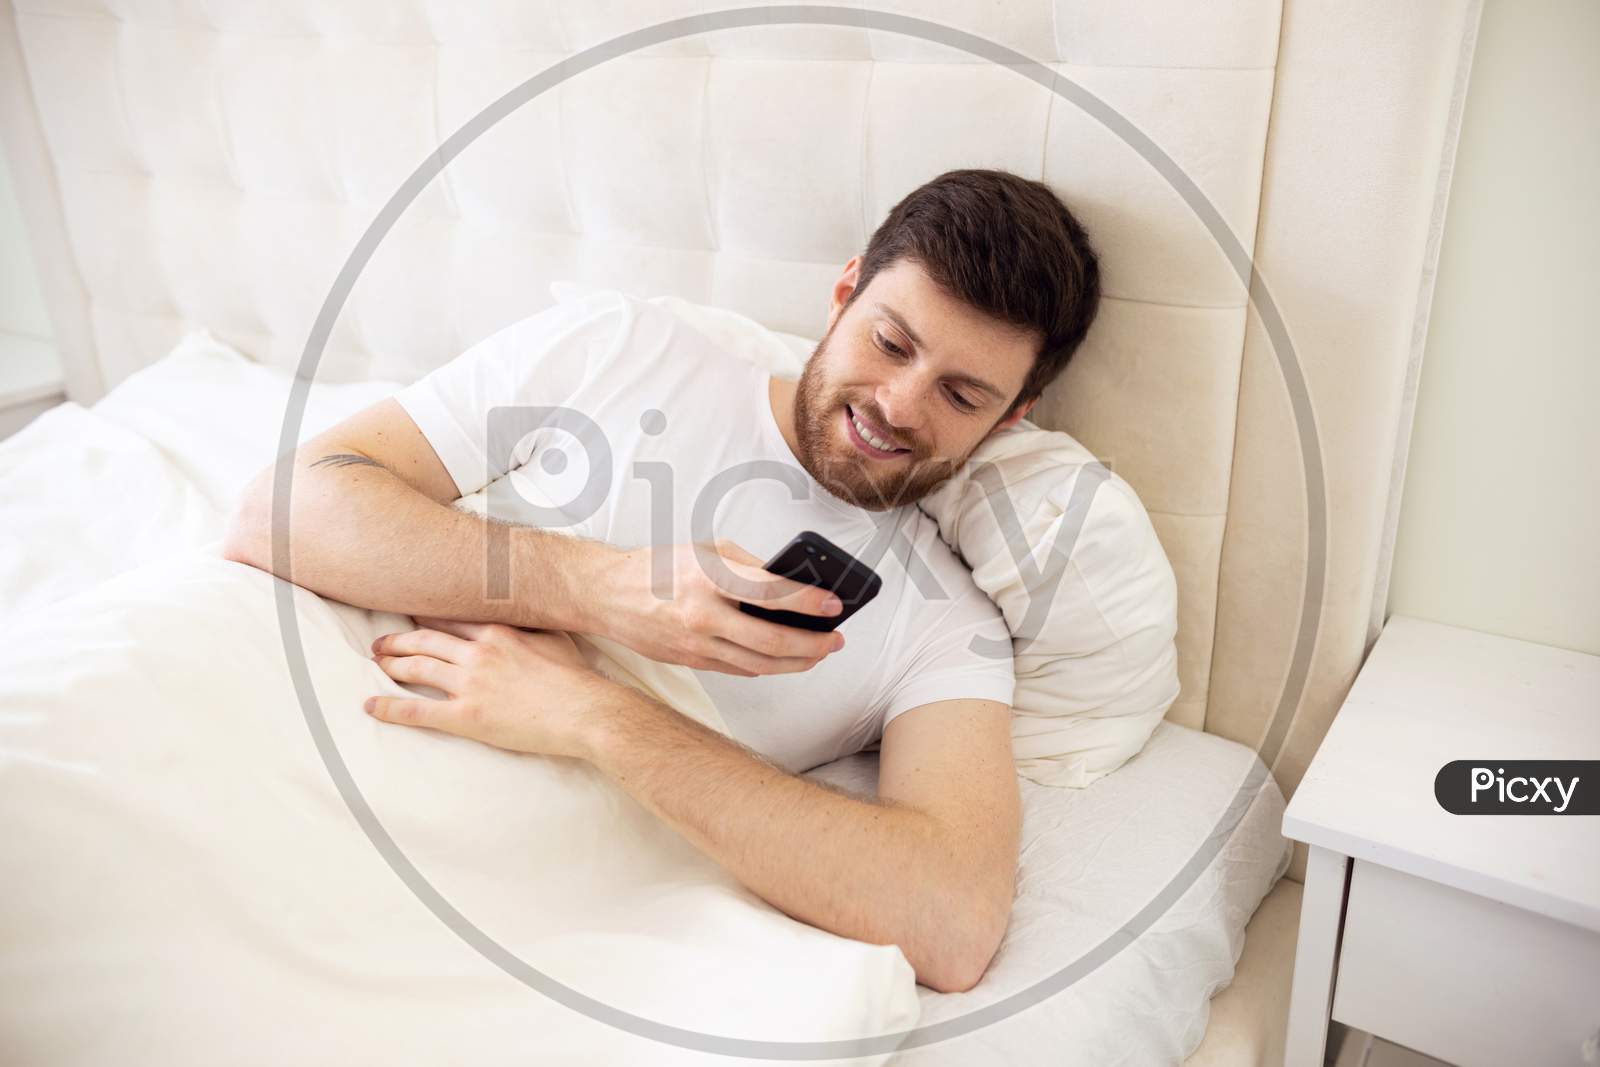 Man Chatting On Phone In Bed. Morning At Home. Smilling Man Using Phone In Bed. Quarantine, Home Work, Medical Care.